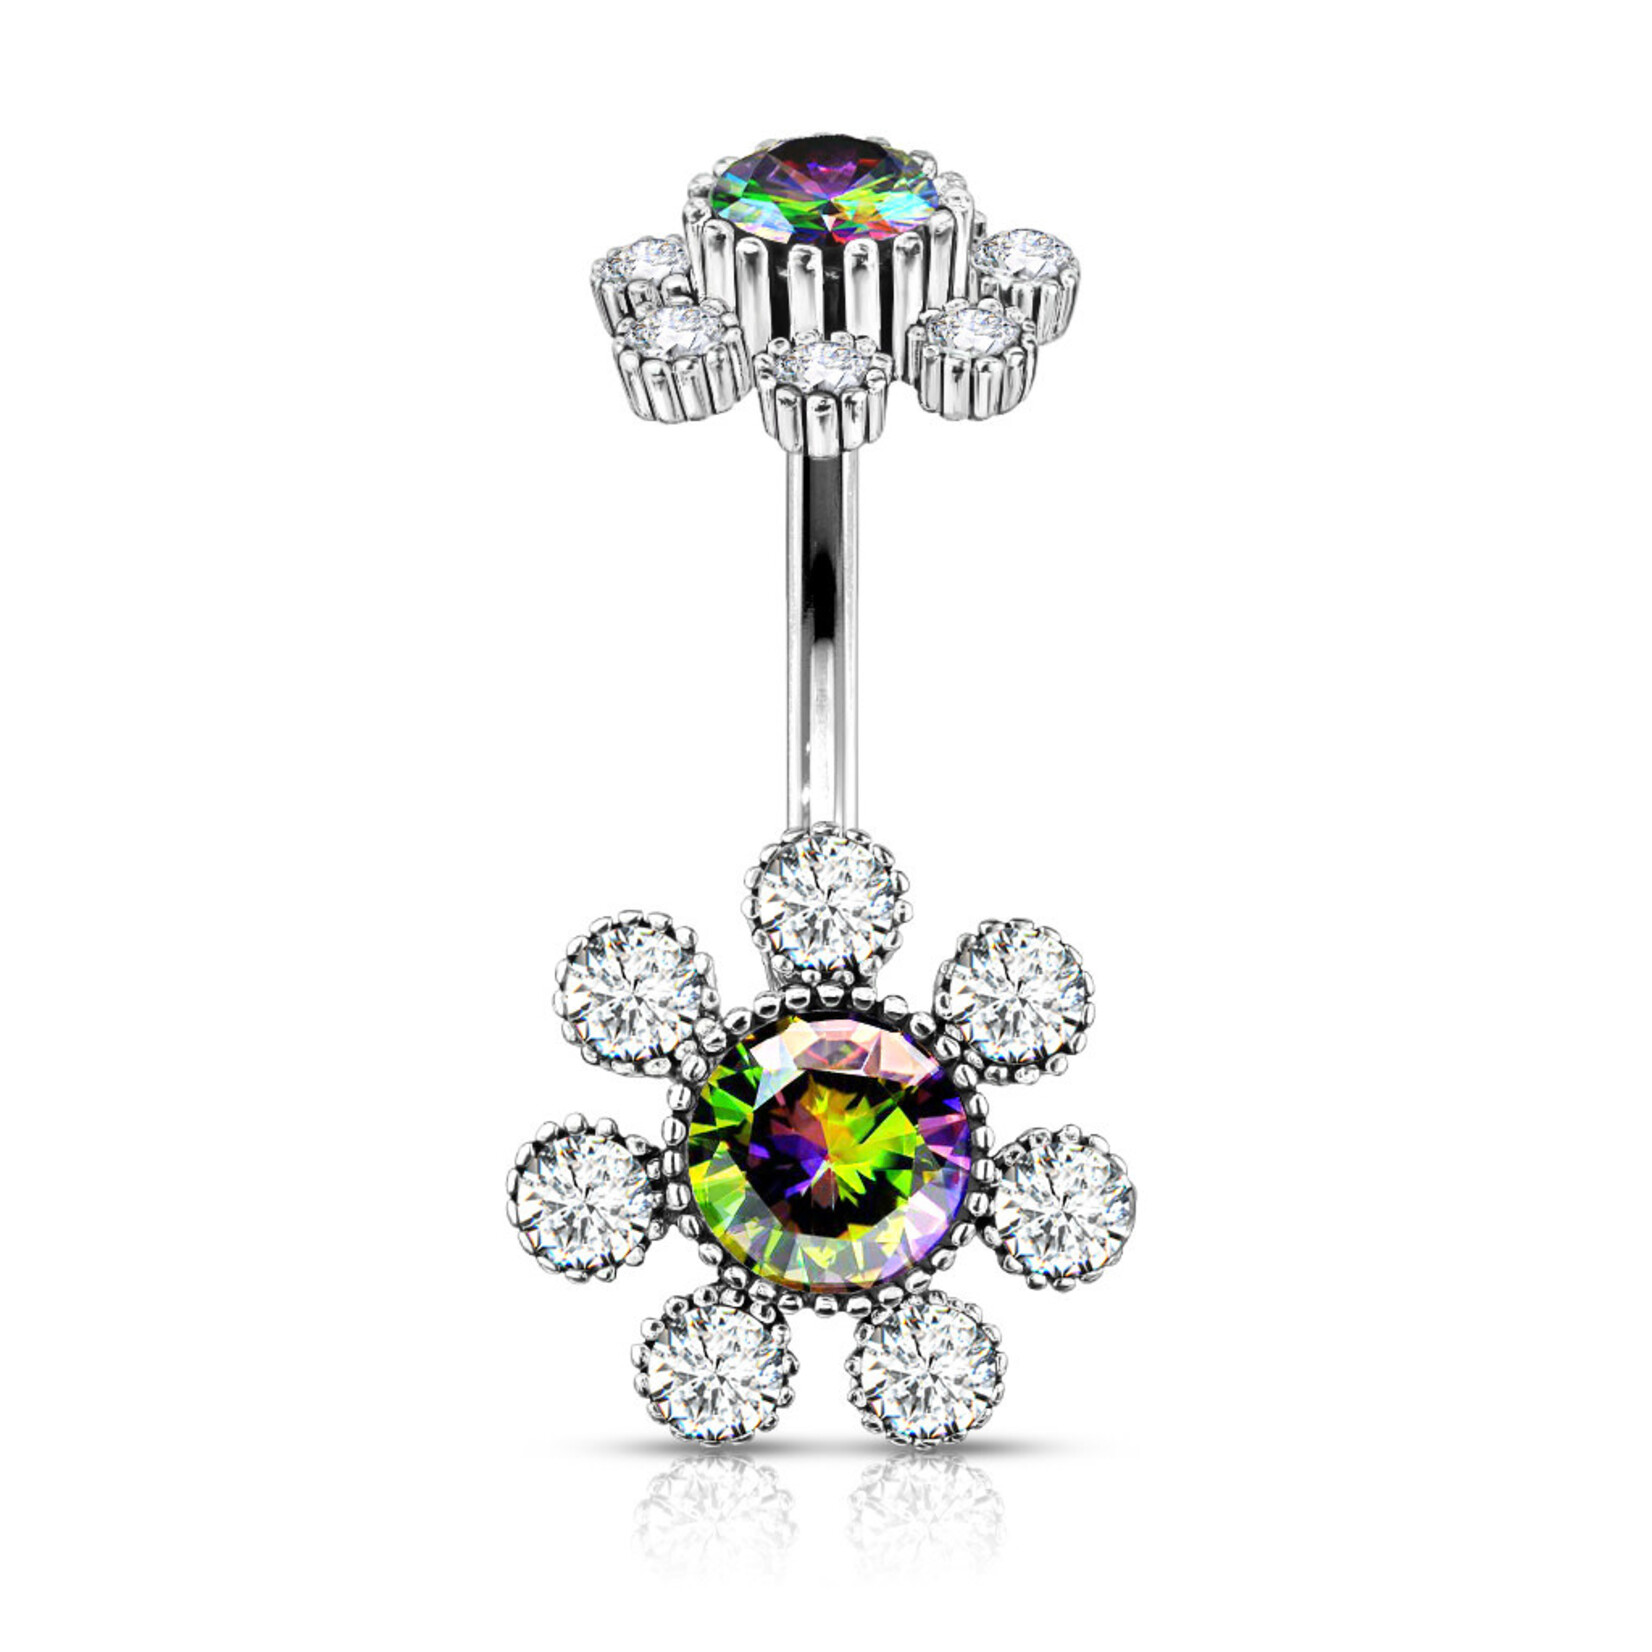 Hollywood Body Jewelry Crystal Flower Navel Ring